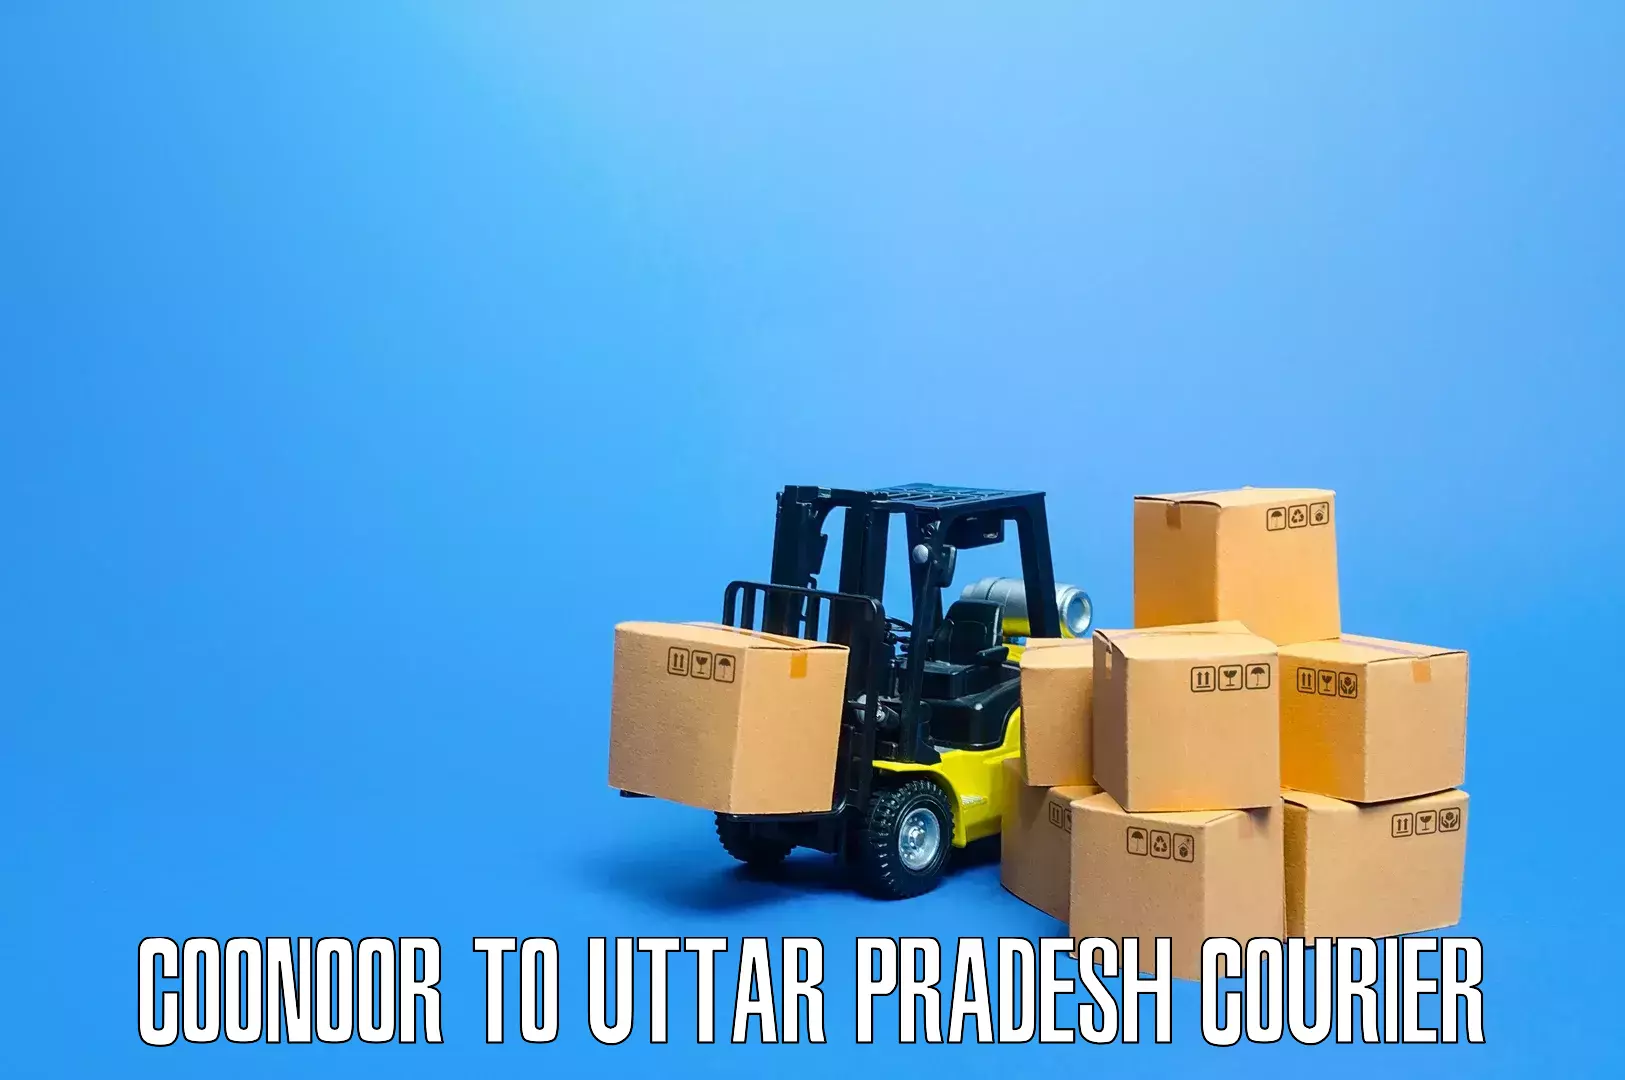 Specialized moving company Coonoor to Allahabad